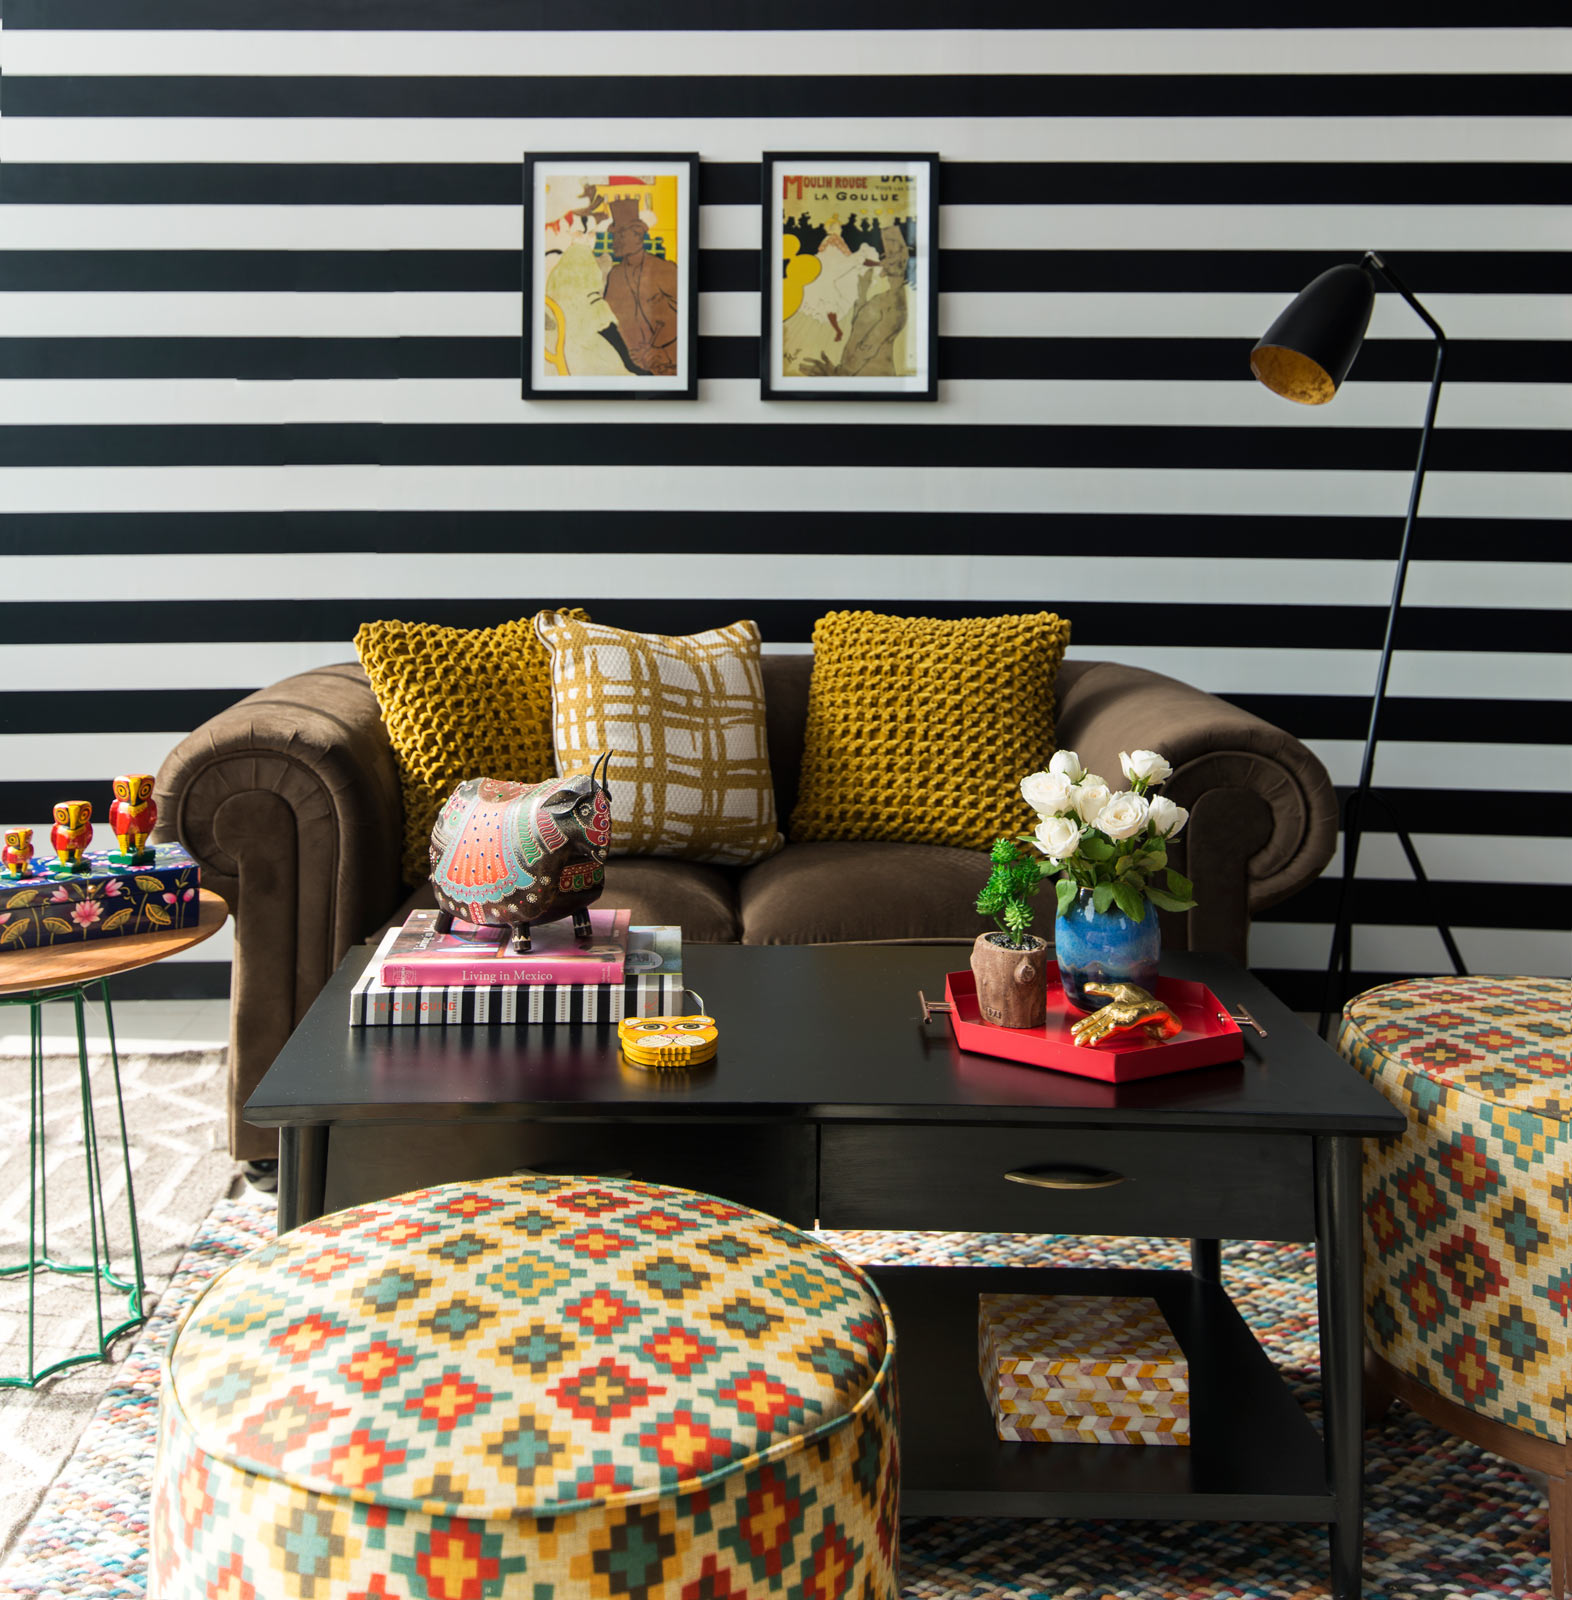 Compact Living Room Design Ideas With Several Patterns, Colours & Textures - Beautiful Homes